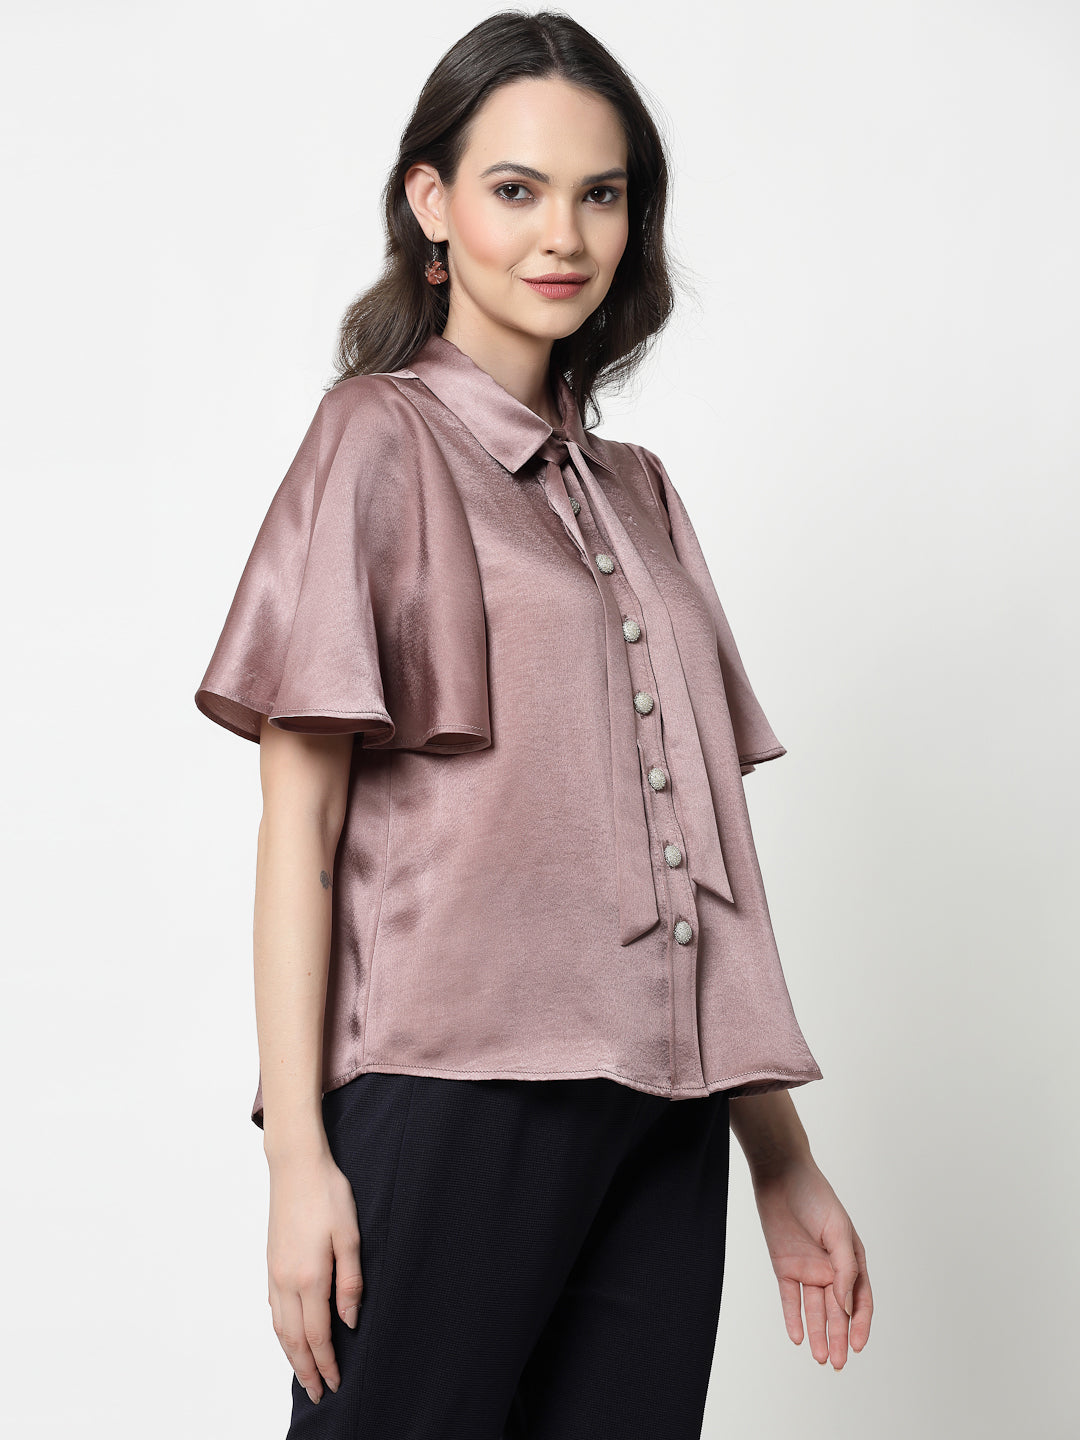 Pink Satin Top With Bell Sleeves & Tie Knot